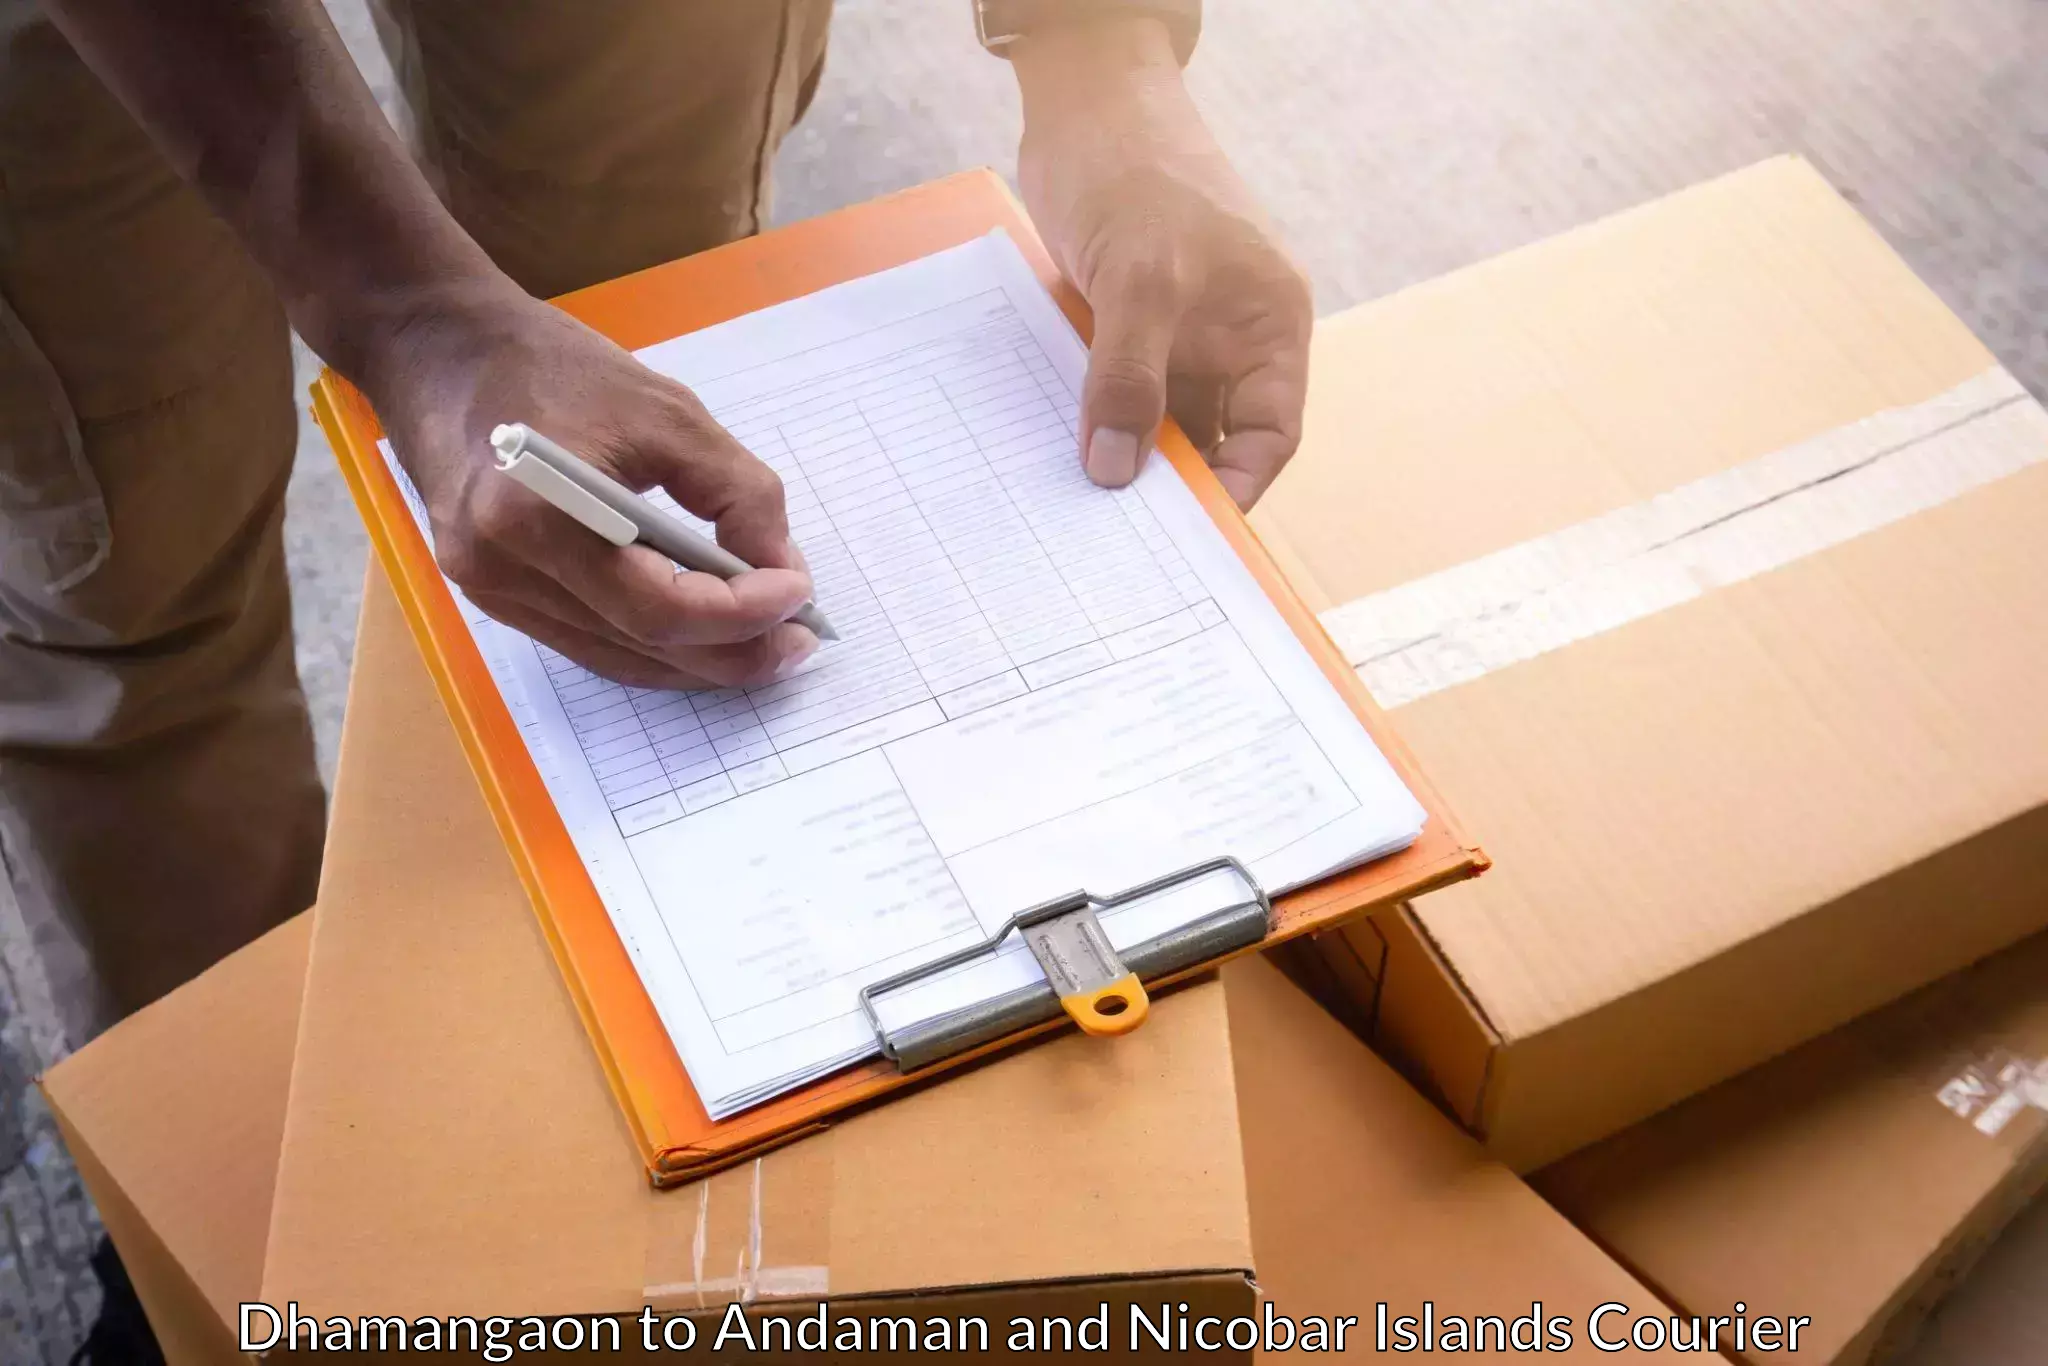 State-of-the-art courier technology Dhamangaon to North And Middle Andaman